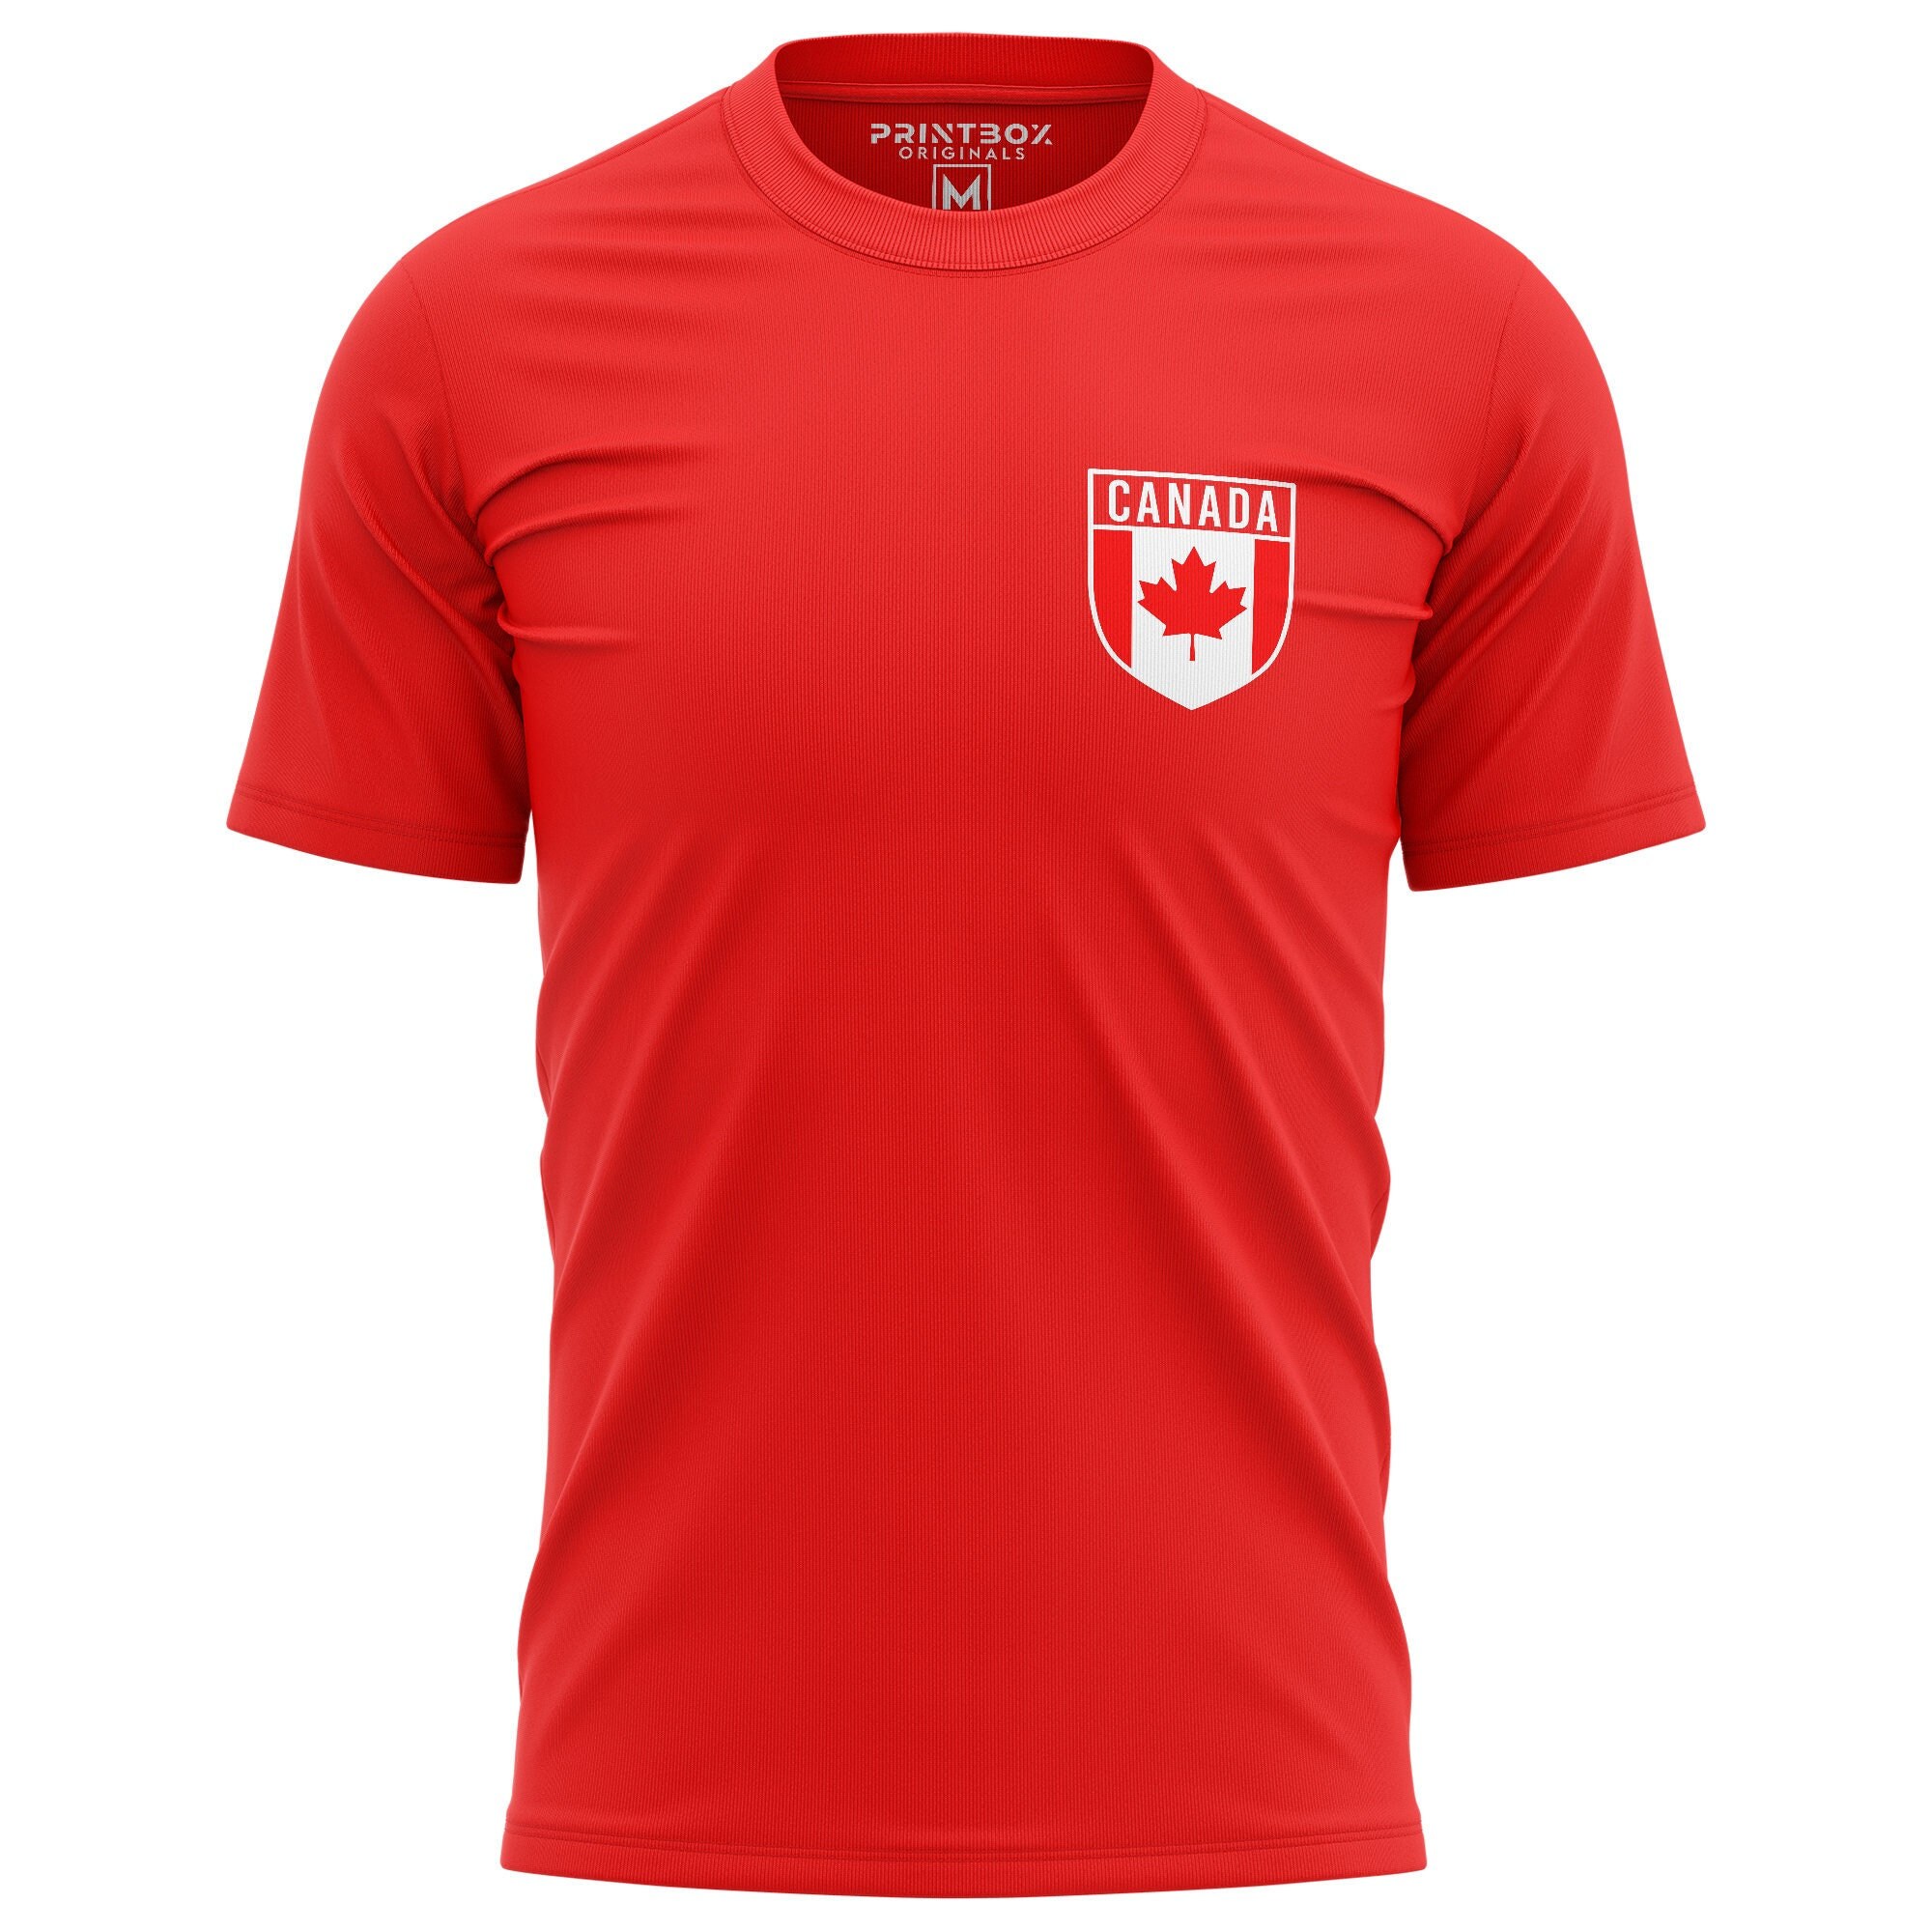 Sports Canada Soccer T-Shirt Jersey Style Short Sleeve Athletic Country National Football Team Graphic Active Tee Top ,s